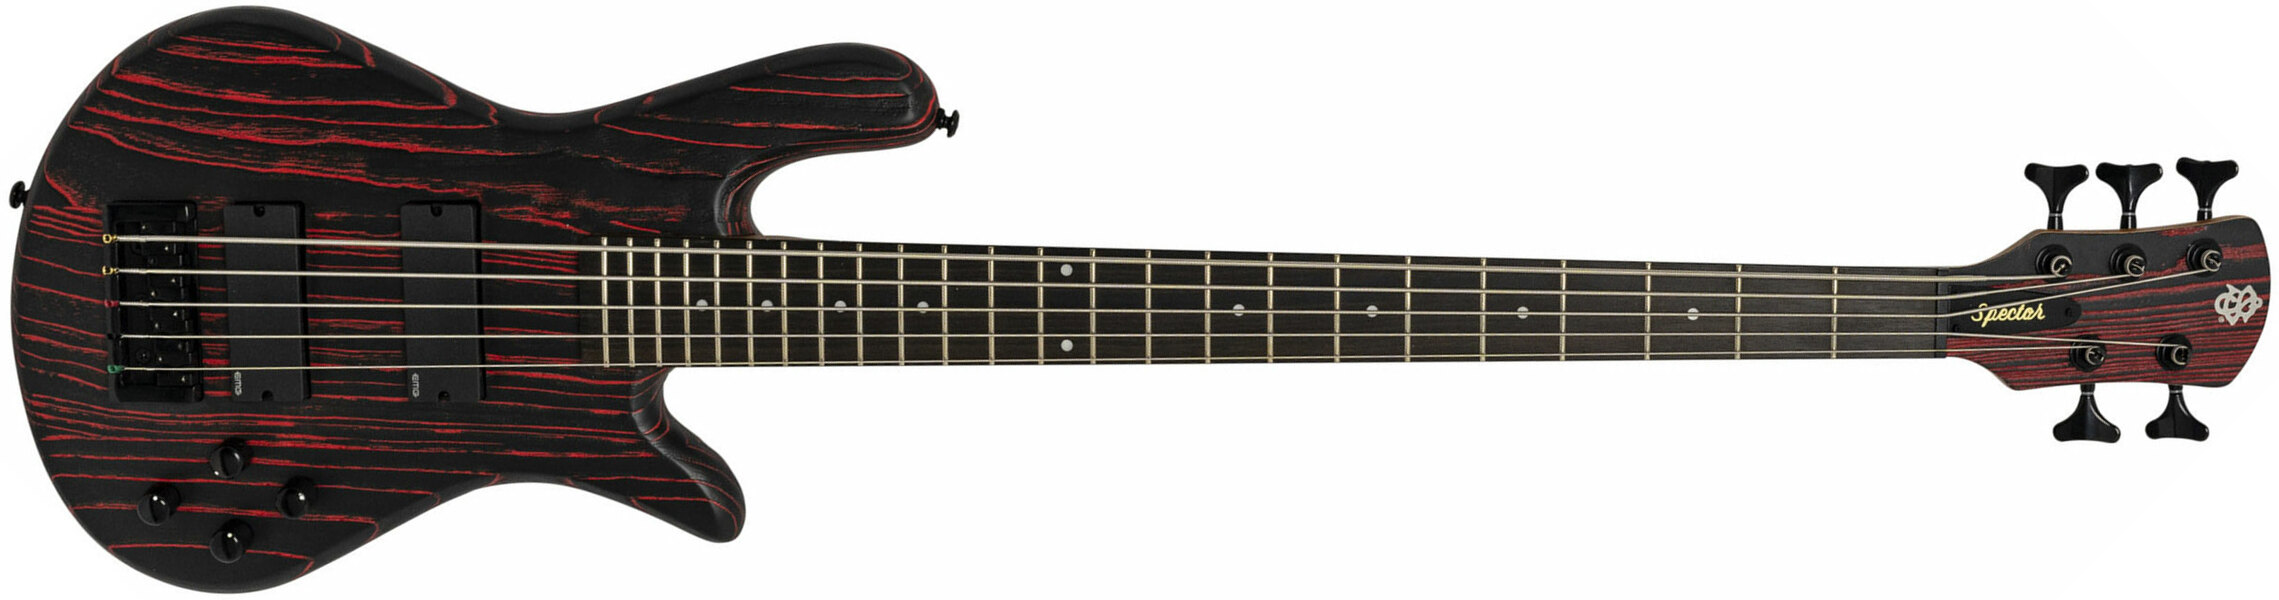 Spector Ns Pulse I 5c Active Emg Eb - Cinder Red - Solid body electric bass - Main picture